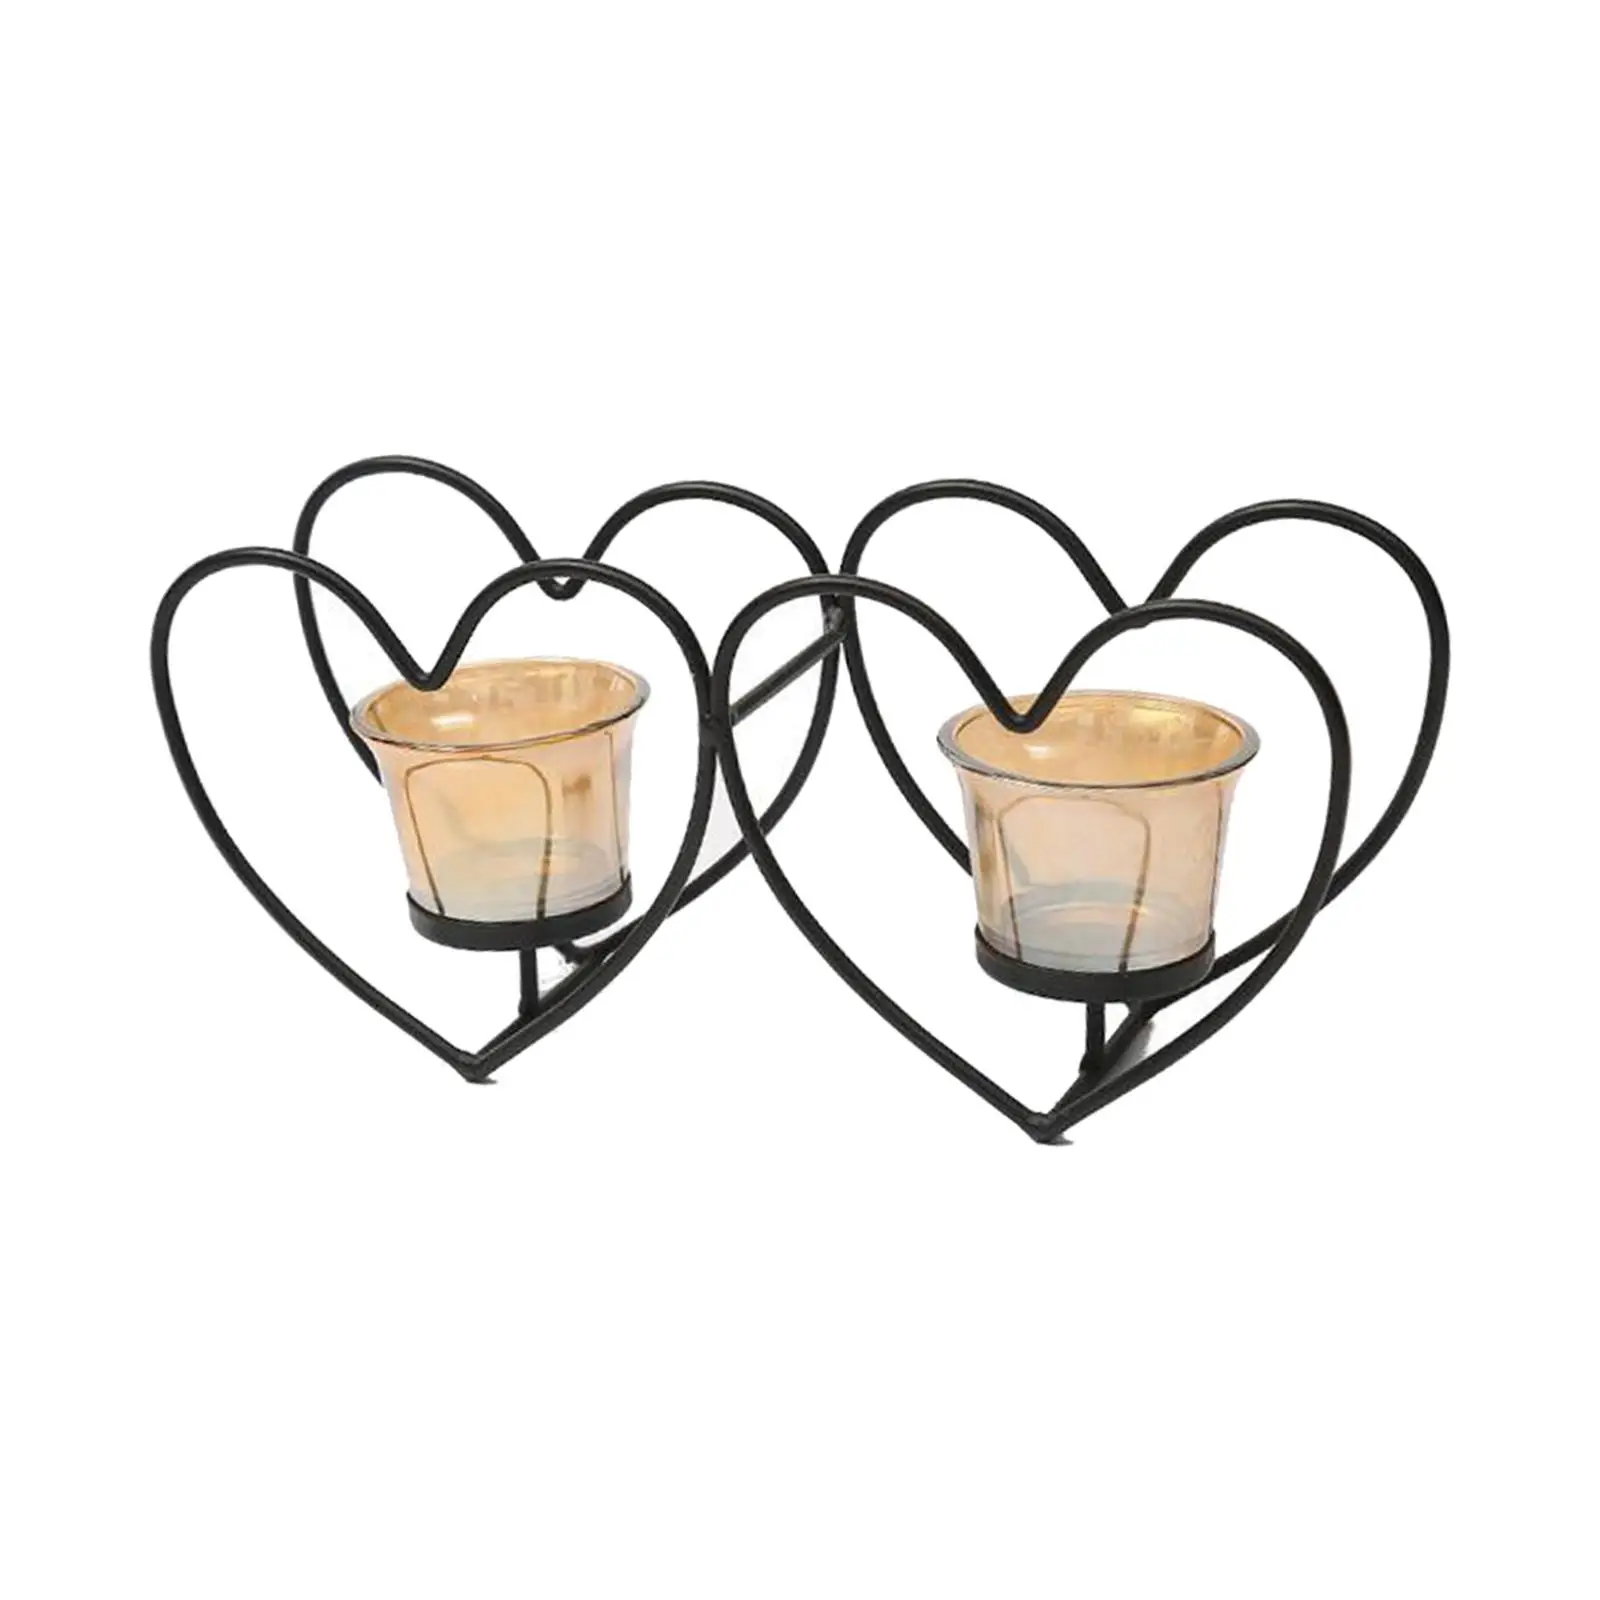 Nordic Heart Candle Holder Metal Candlestick Decorative Candle Stand Party Wedding Holiday Birthday Decor